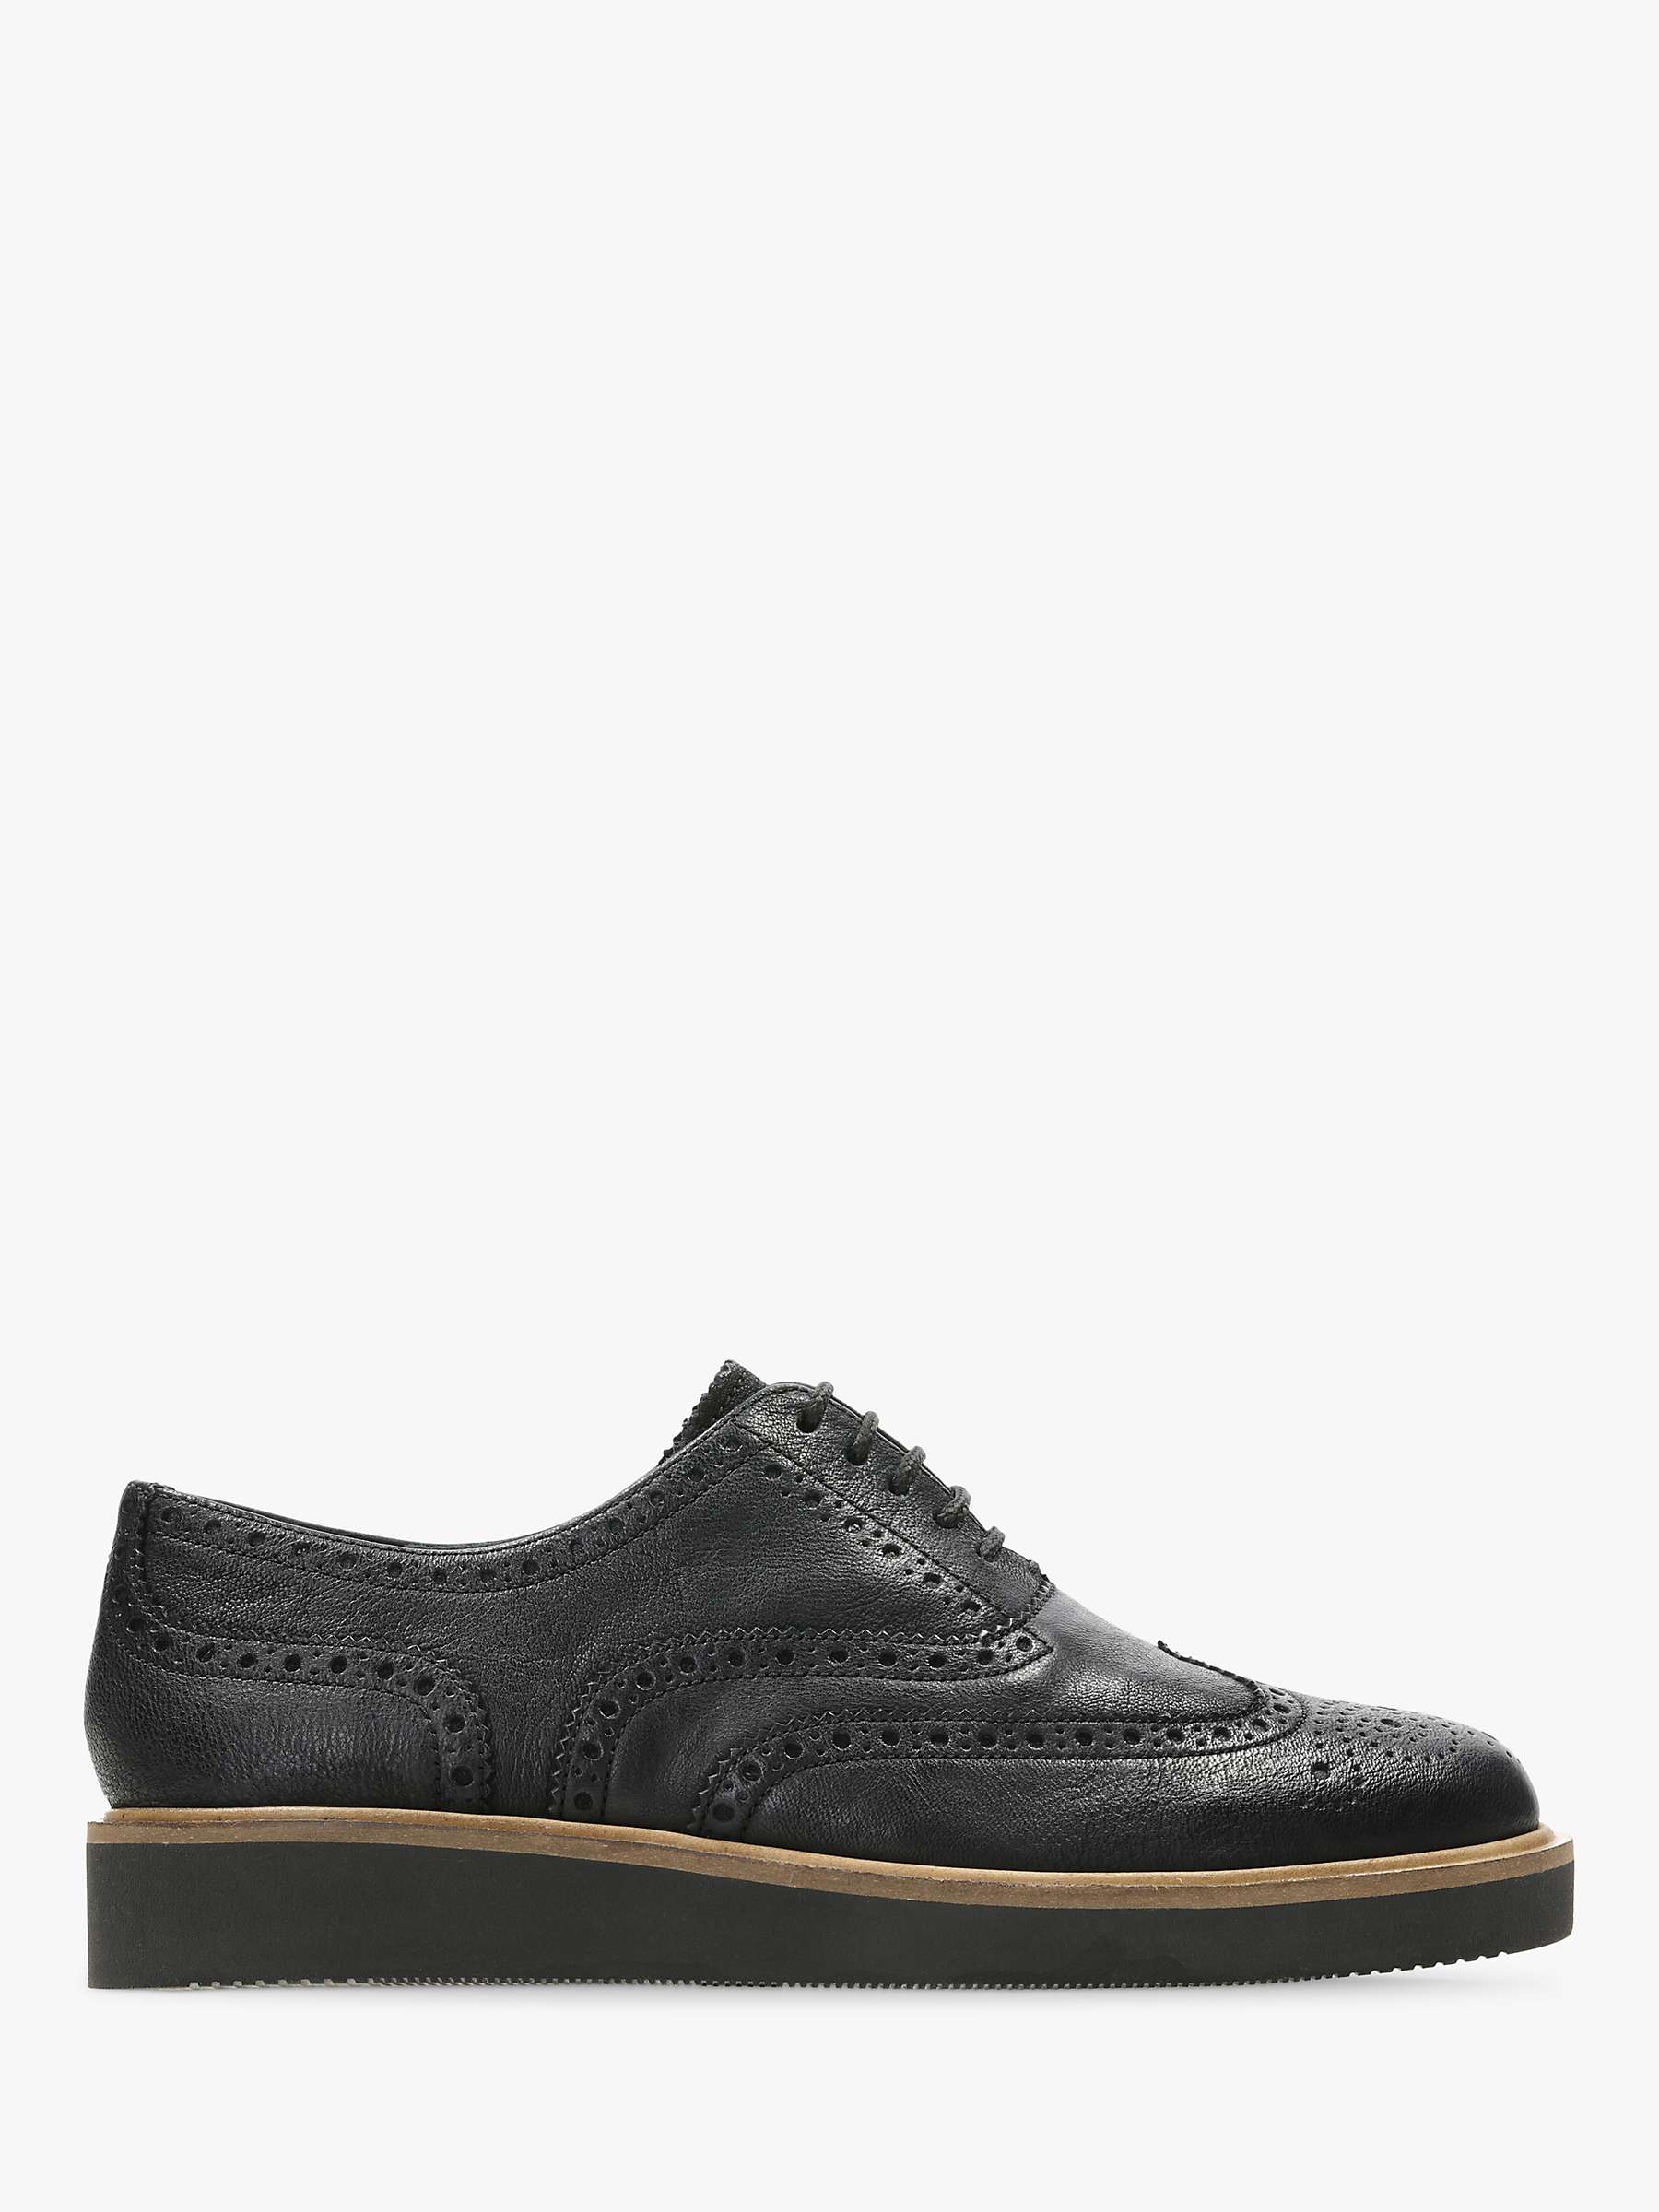 Buy Clarks Baille Leather Brogues, Black Online at johnlewis.com